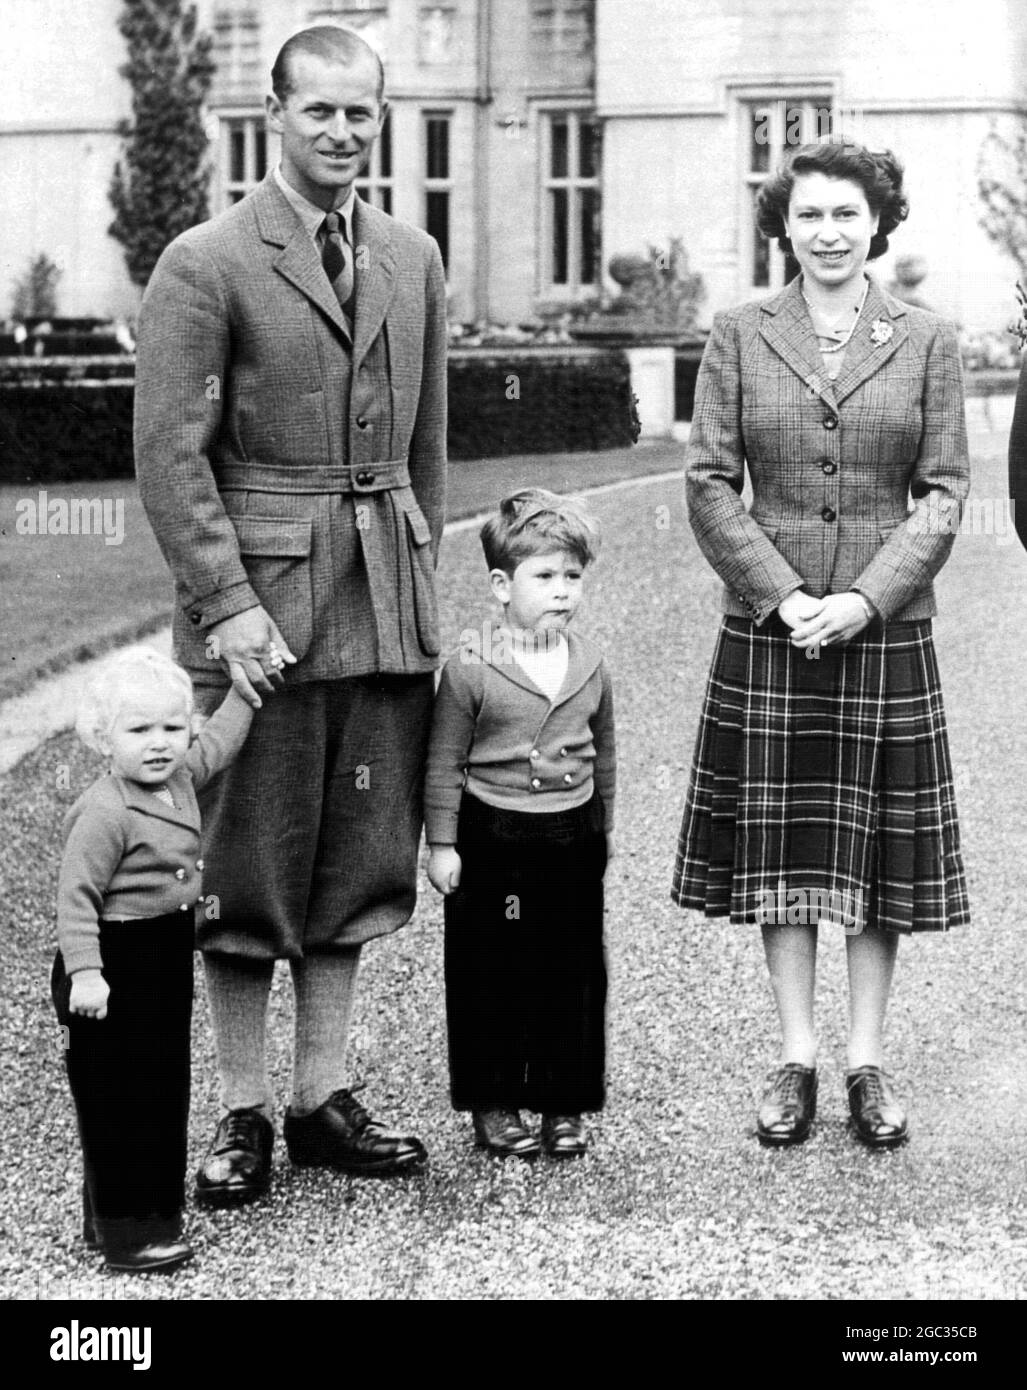 Queen to have another baby. 8th August 1959. It has been announced from Buckingham Palace that the Queen expects a baby early next year. The news was witheld until she and the Duke had returned from the tour of Canada and had left London with their children for a holiday at Balmoral. All her engagements have been cancelled, including the tour of Ghana. Stock Photo